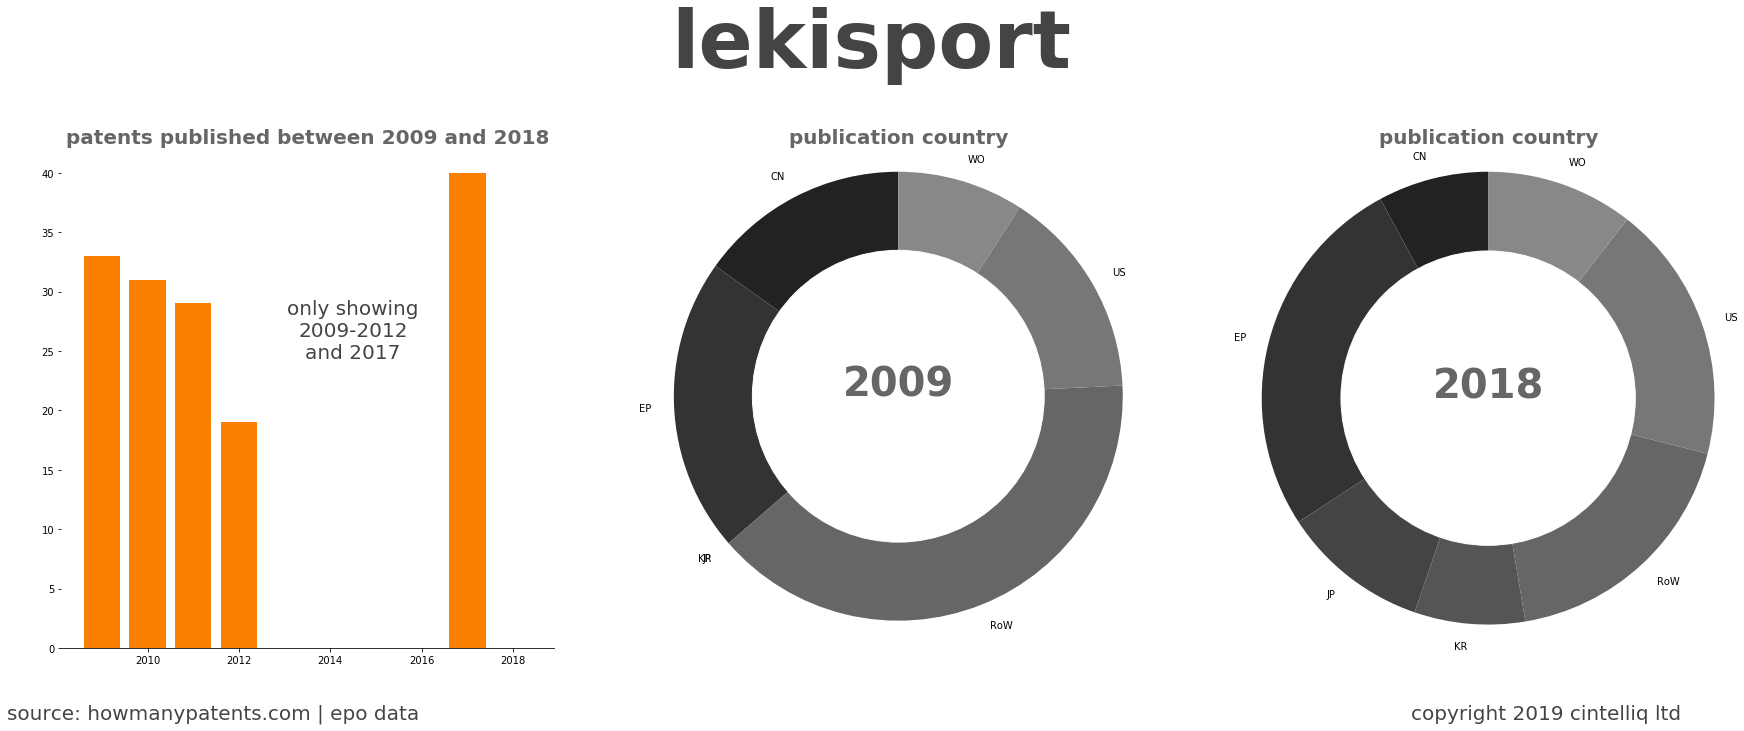 summary of patents for Lekisport